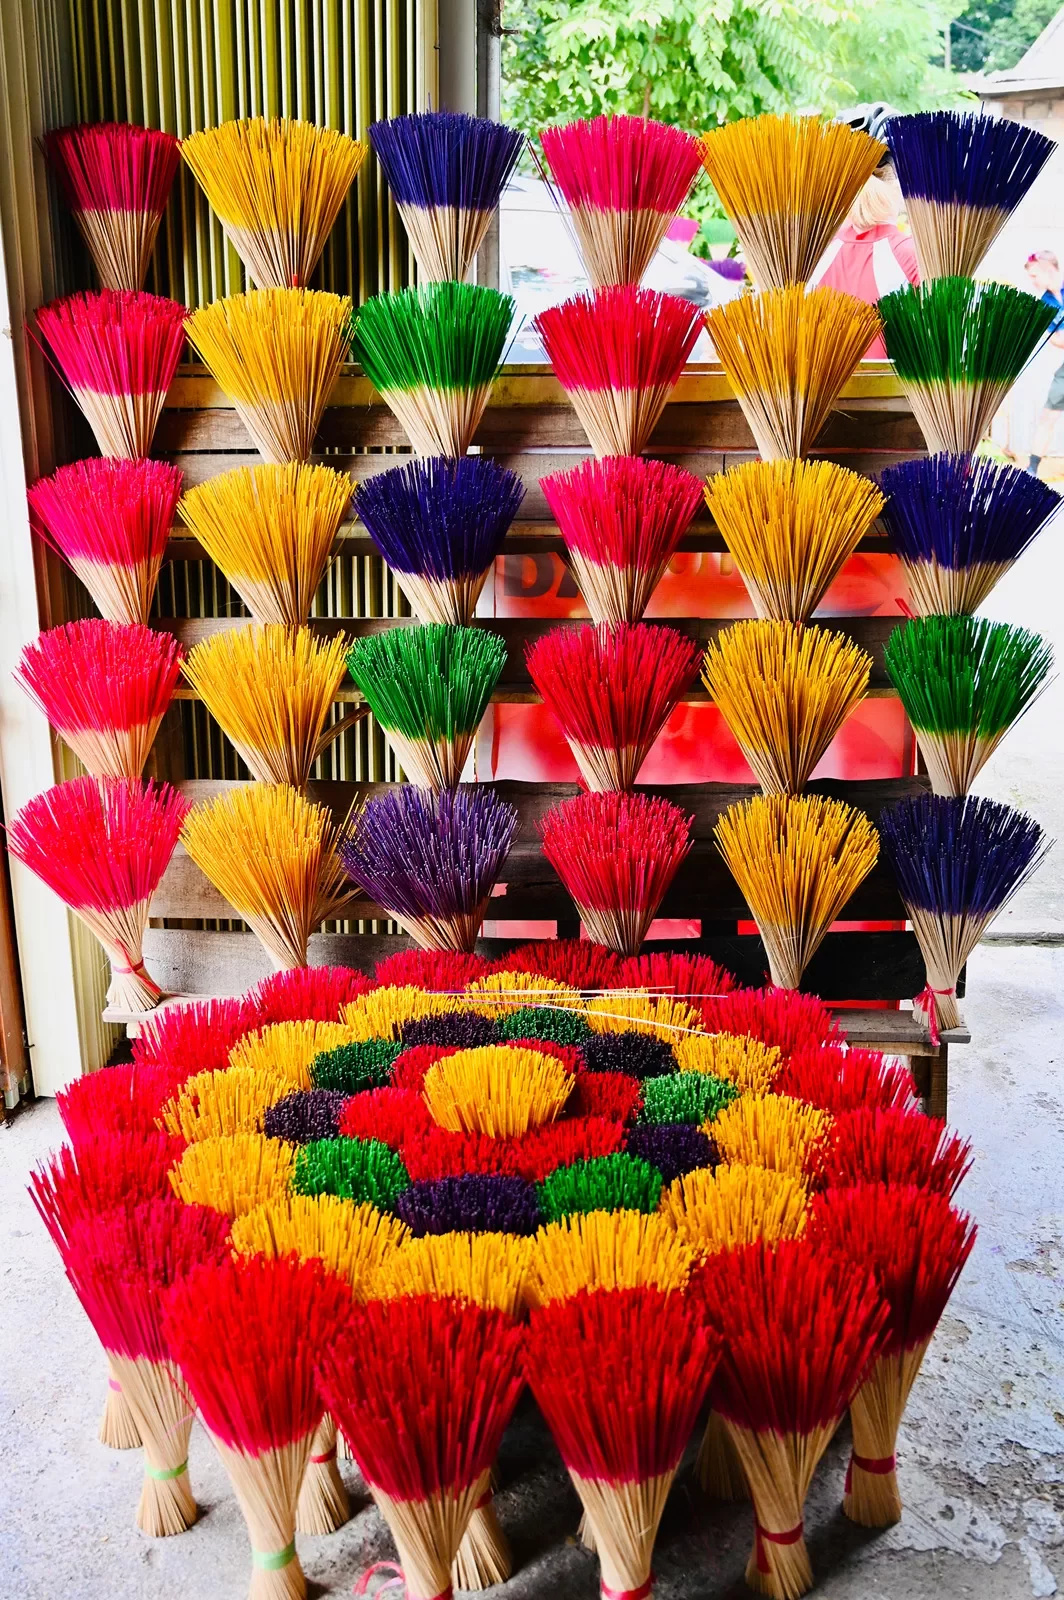 Large array of colorful incense sticks.